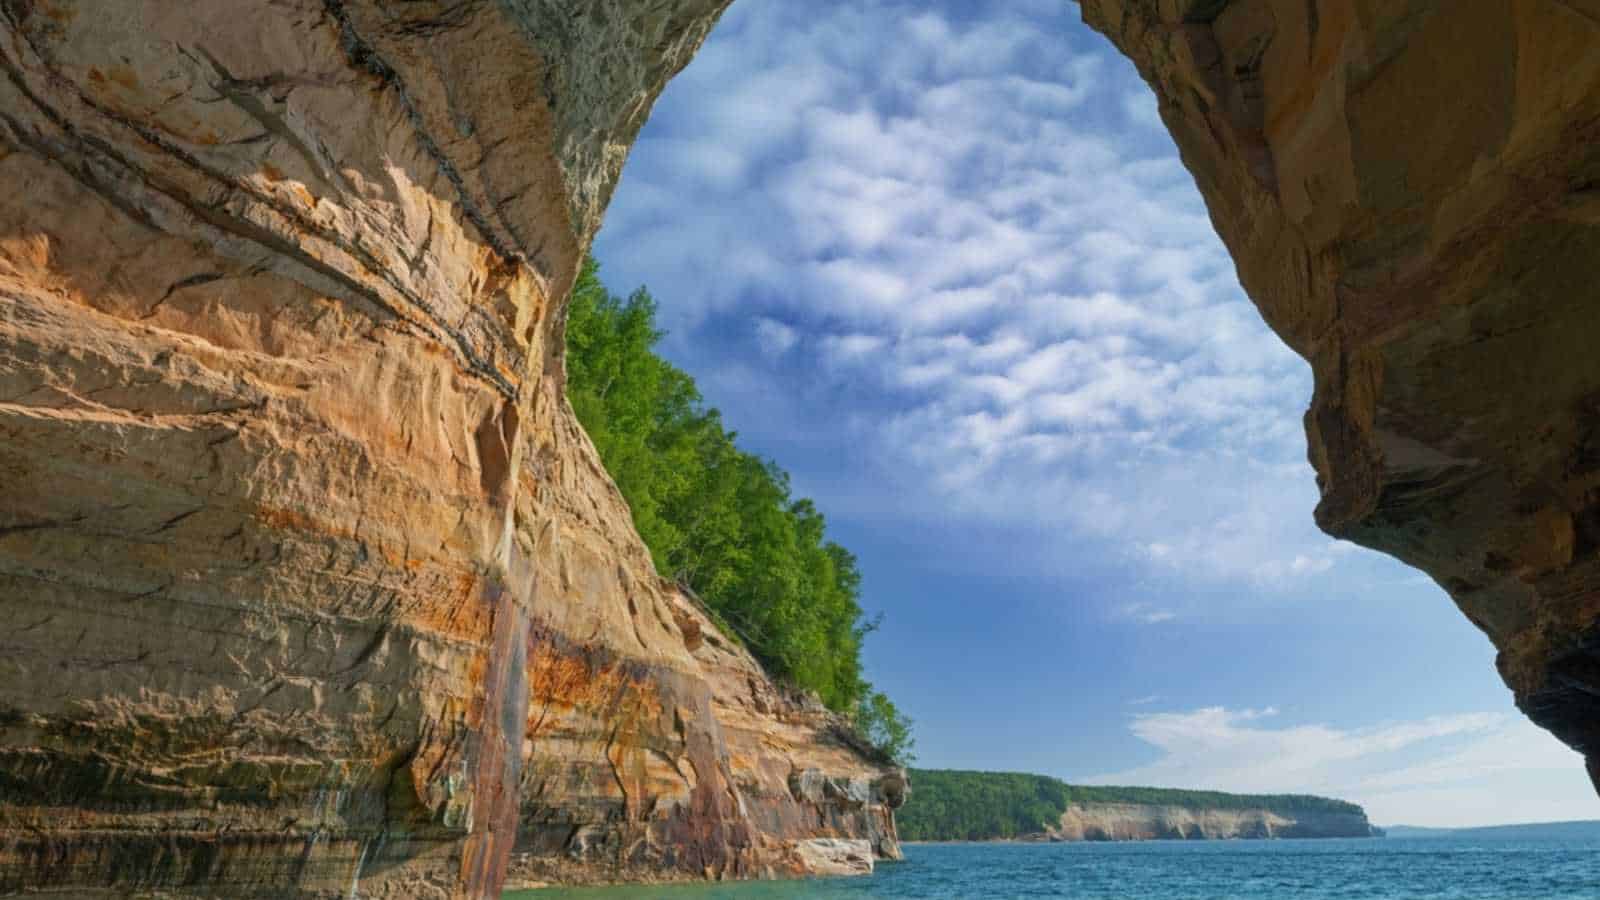 Landscape near sunset of Lover’s Leap Arch, Pictured Rocks National Lakeshore, Lake Superior, Michigan’s Upper Peninsula, USA